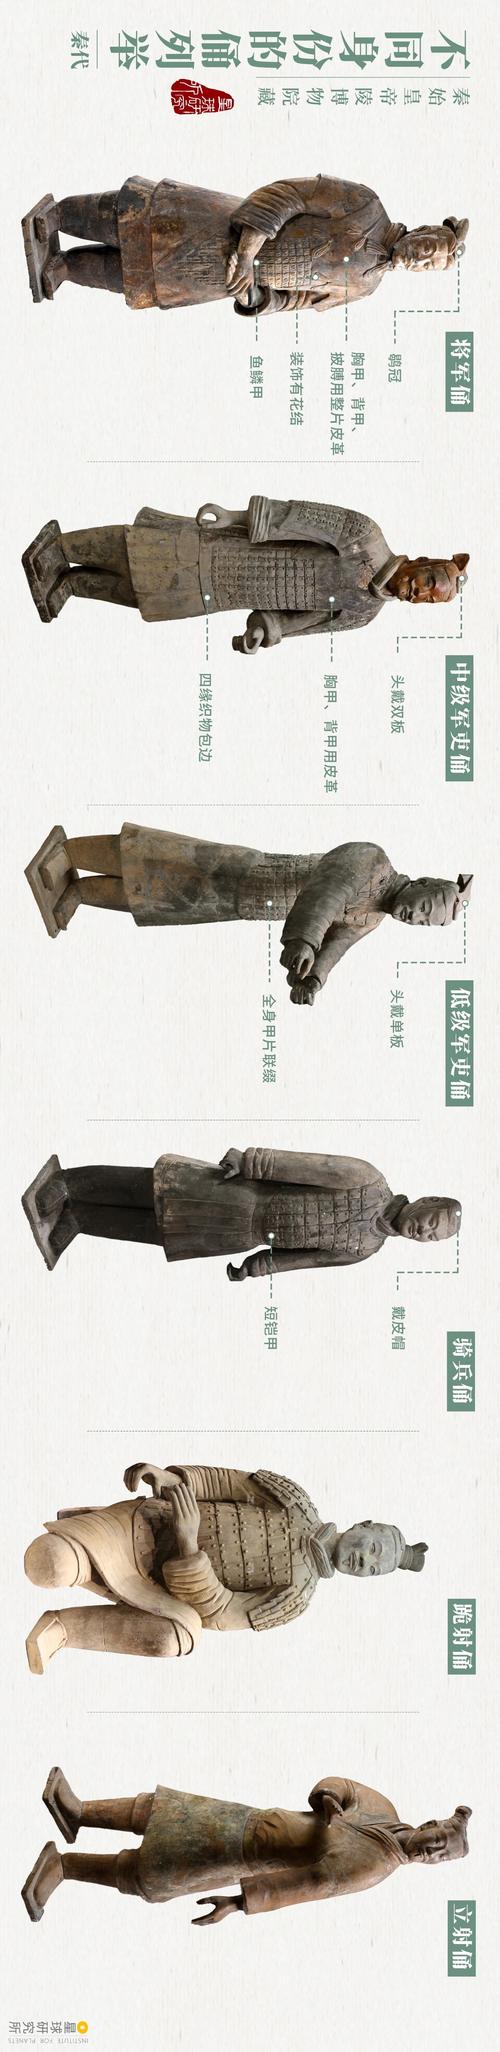 How many years did it take to make the terracotta warriors?